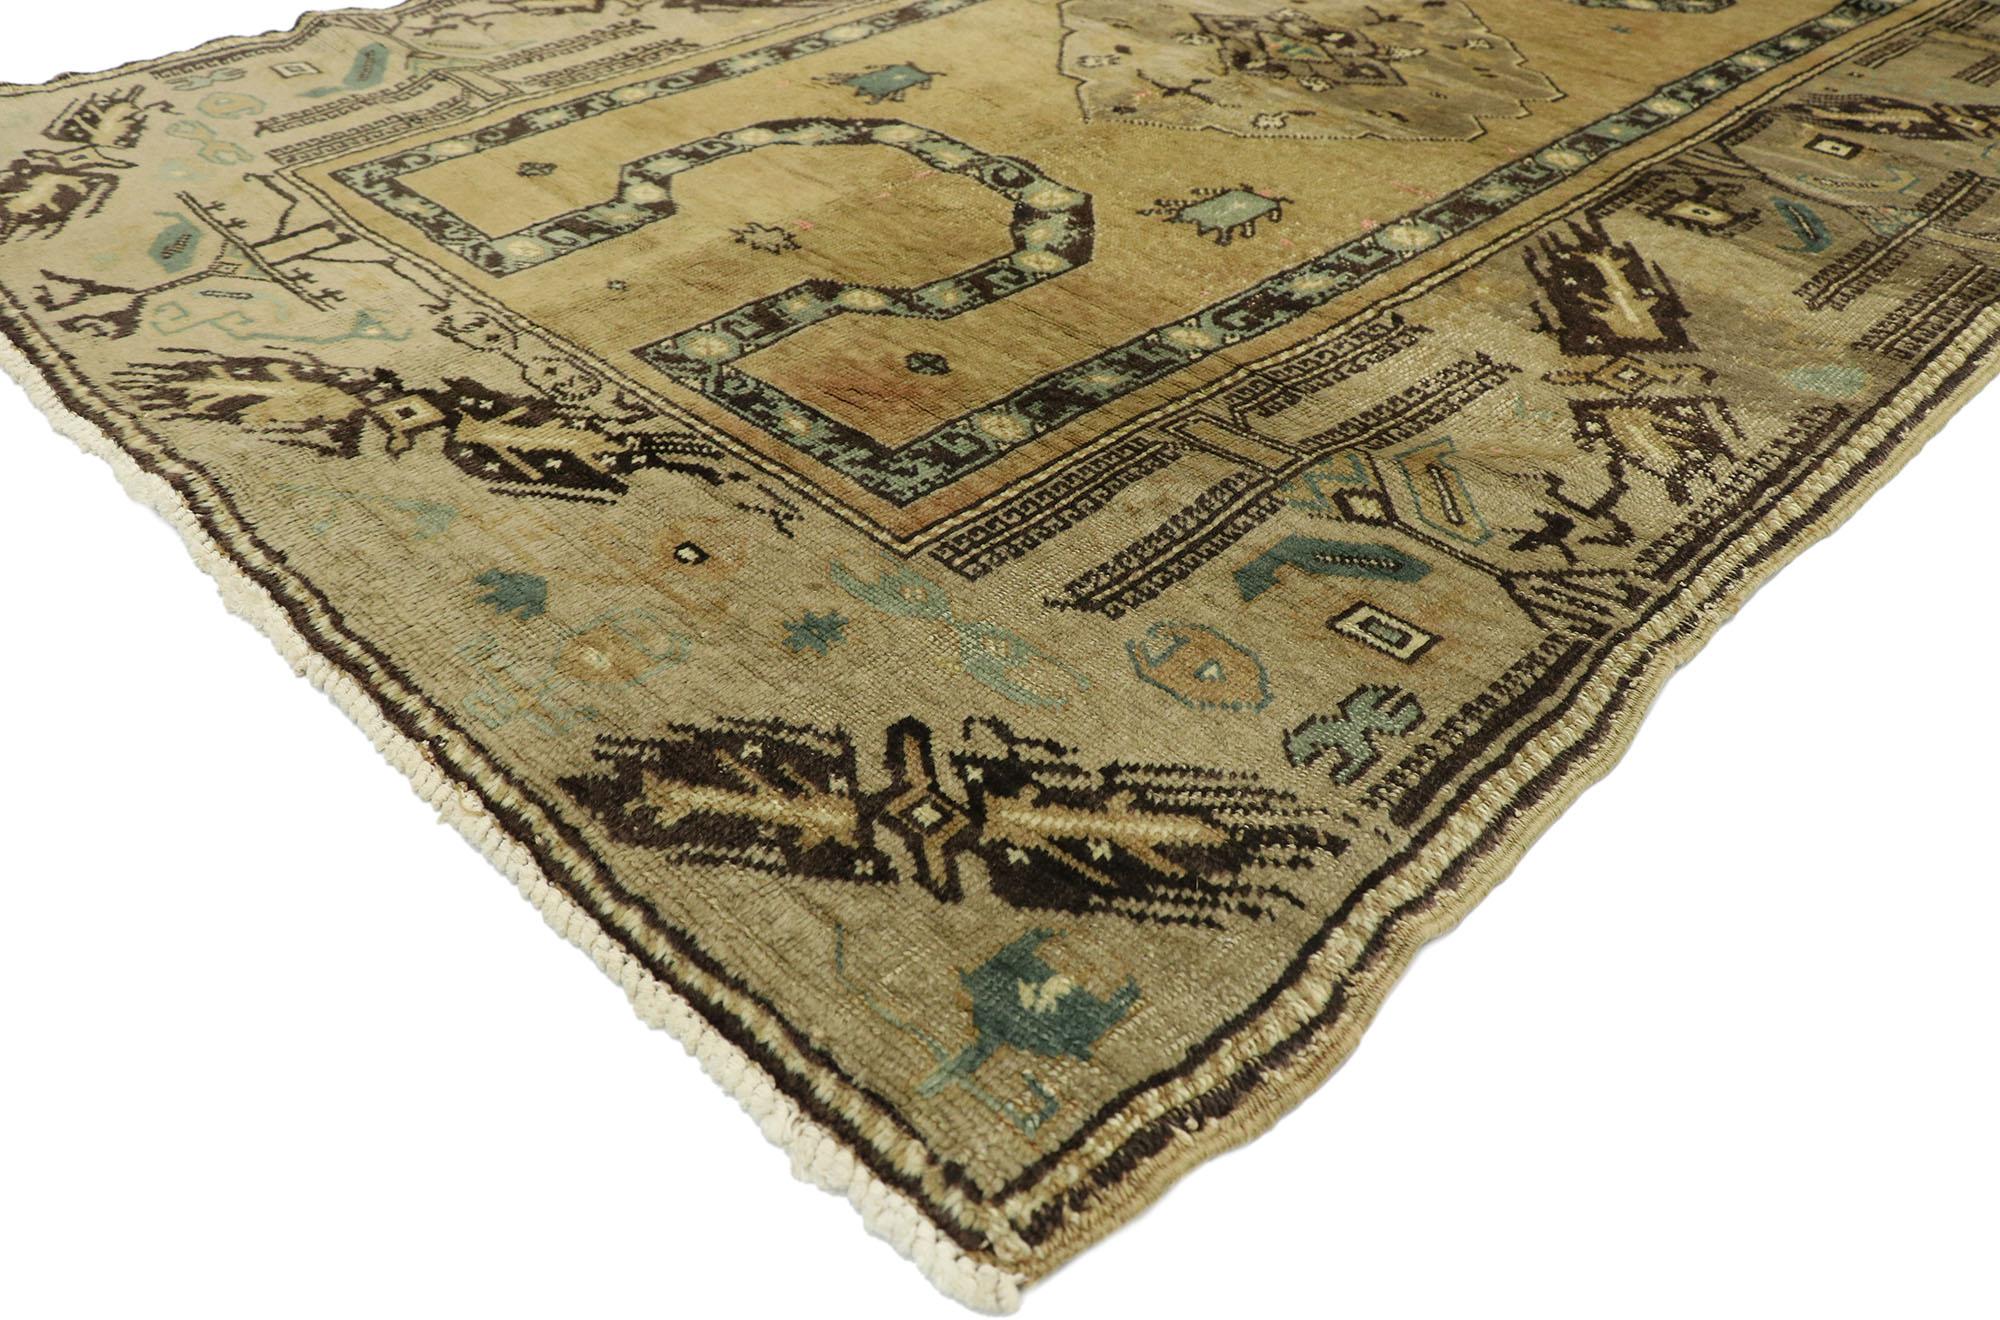 52765, vintage Turkish Oushak rug with Late Victorian style. This hand knotted wool vintage Turkish Oushak rug features a small taupe colored cusped medallion dotted with Anatolian symbols on an abrashed tan field. A dark coffee colored band